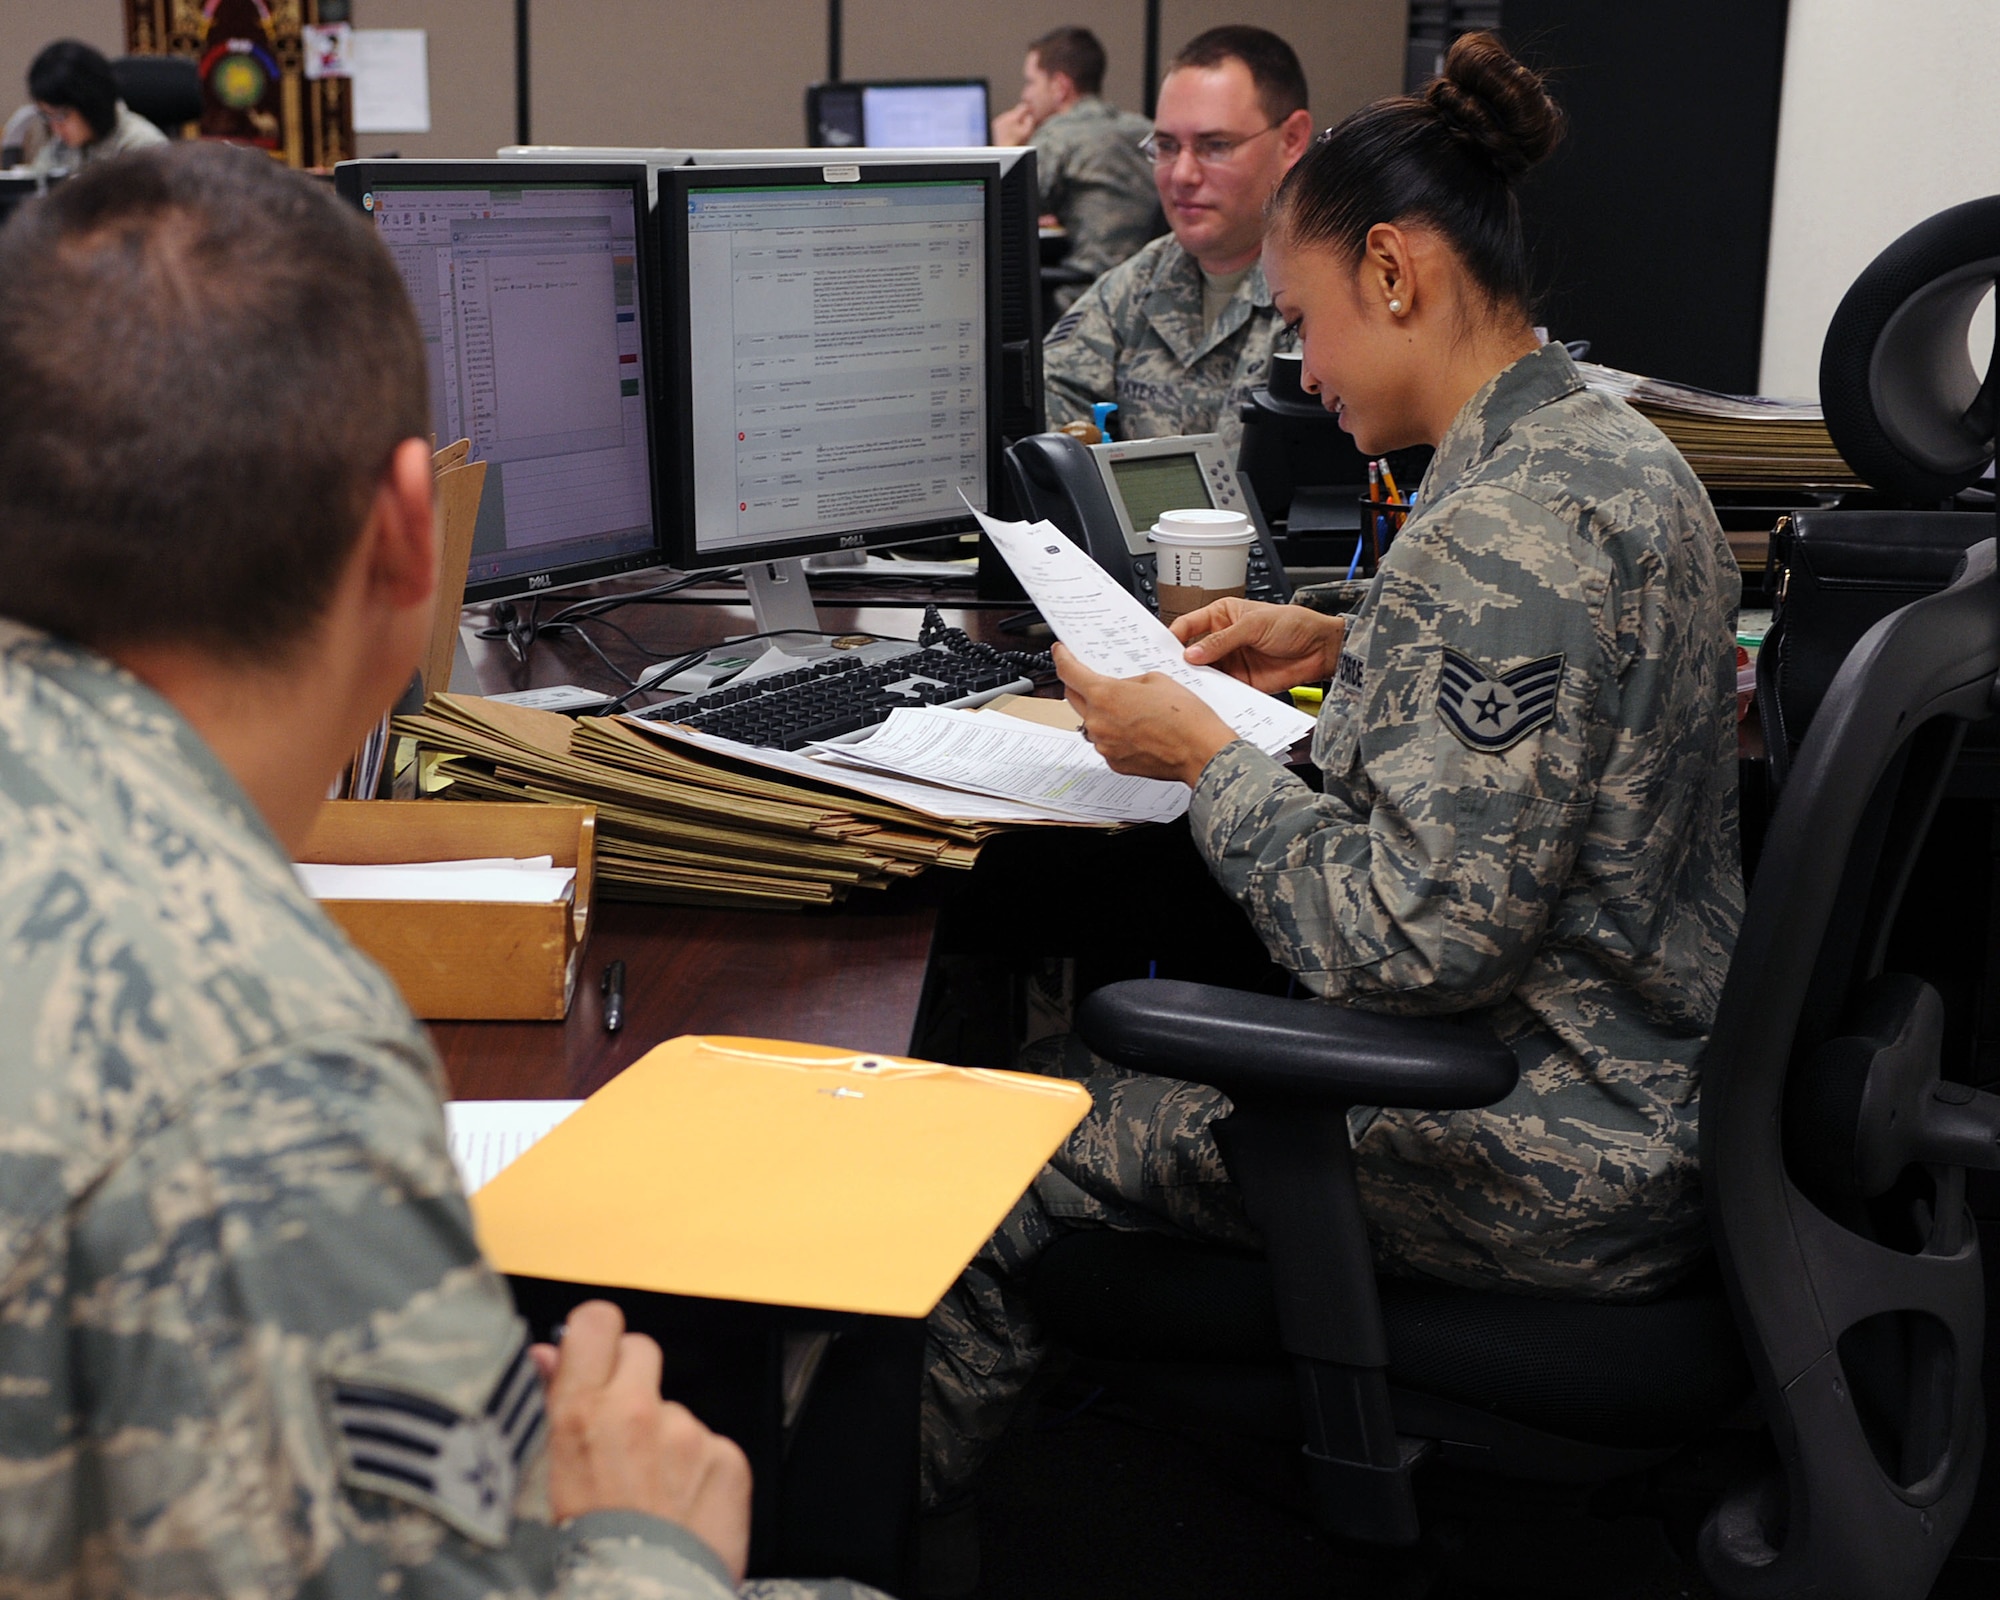 U.S. Air Force Staff Sgt. Romalyn Vanderloop, 355th Force Support Squadron helps an Airman in the process of permanent change of station at Davis-Monthan Air Force Base, Ariz., June 5, 2013. D-M’s Outbound Assignments office deals with 650 to 900 assignments during the busiest permanent change of station periods (U.S. Air Force photo by Airman 1st Class Christine Griffiths/Released)